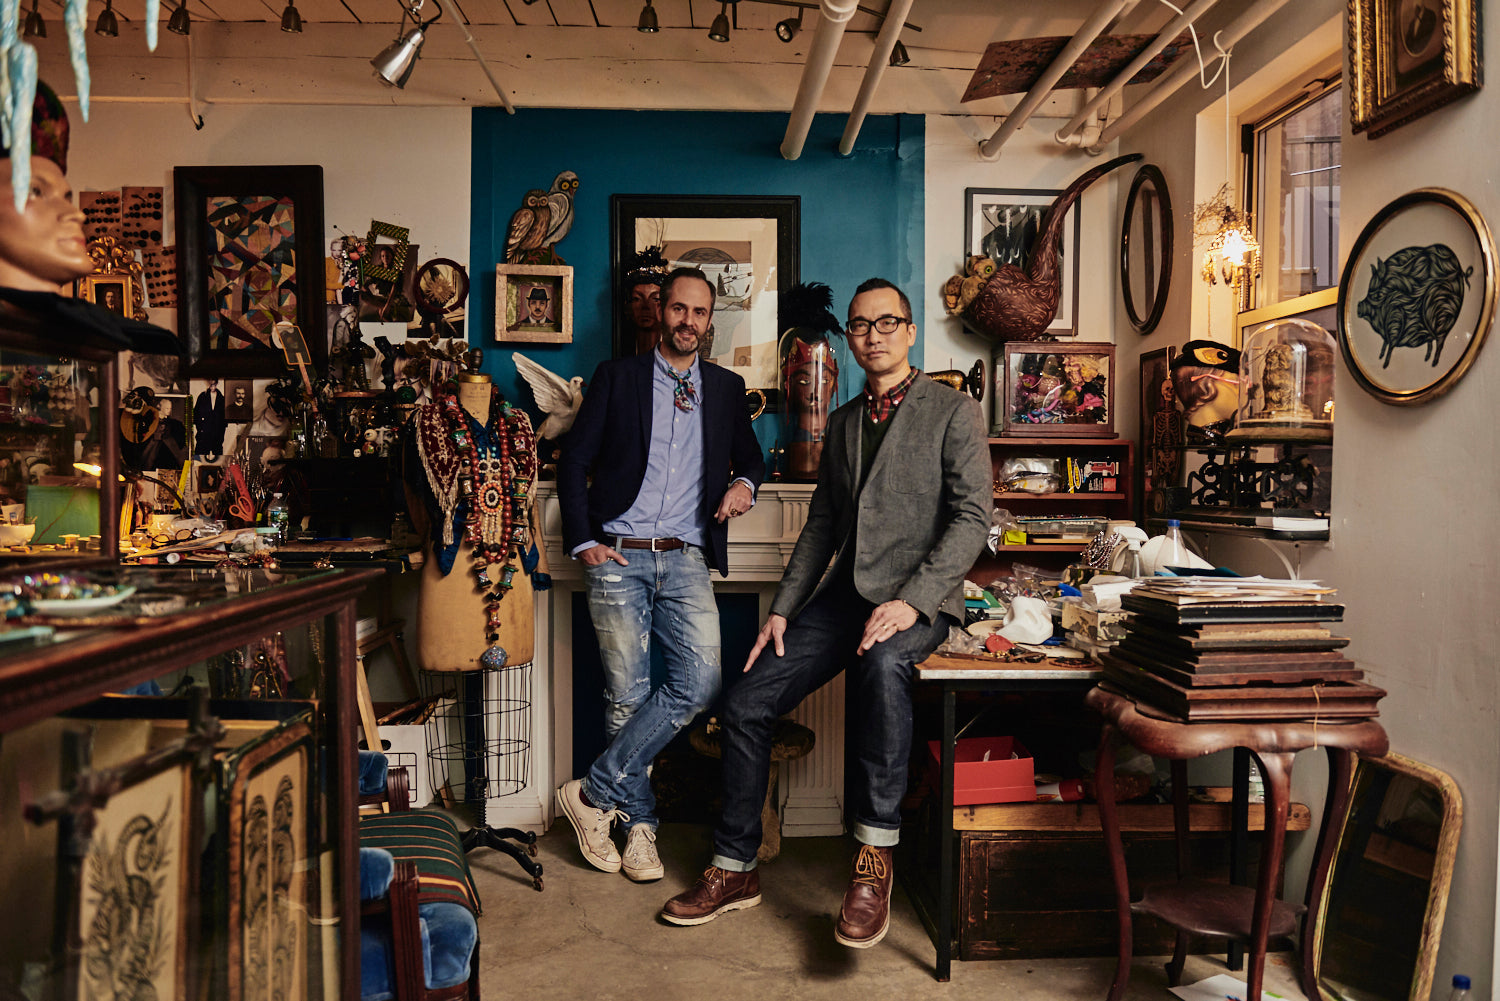 Don Carney and John Ross stand in their eclectic PATCH NYC studio, surrounded by art, jewellery, art supplies, books, and vintage décor.